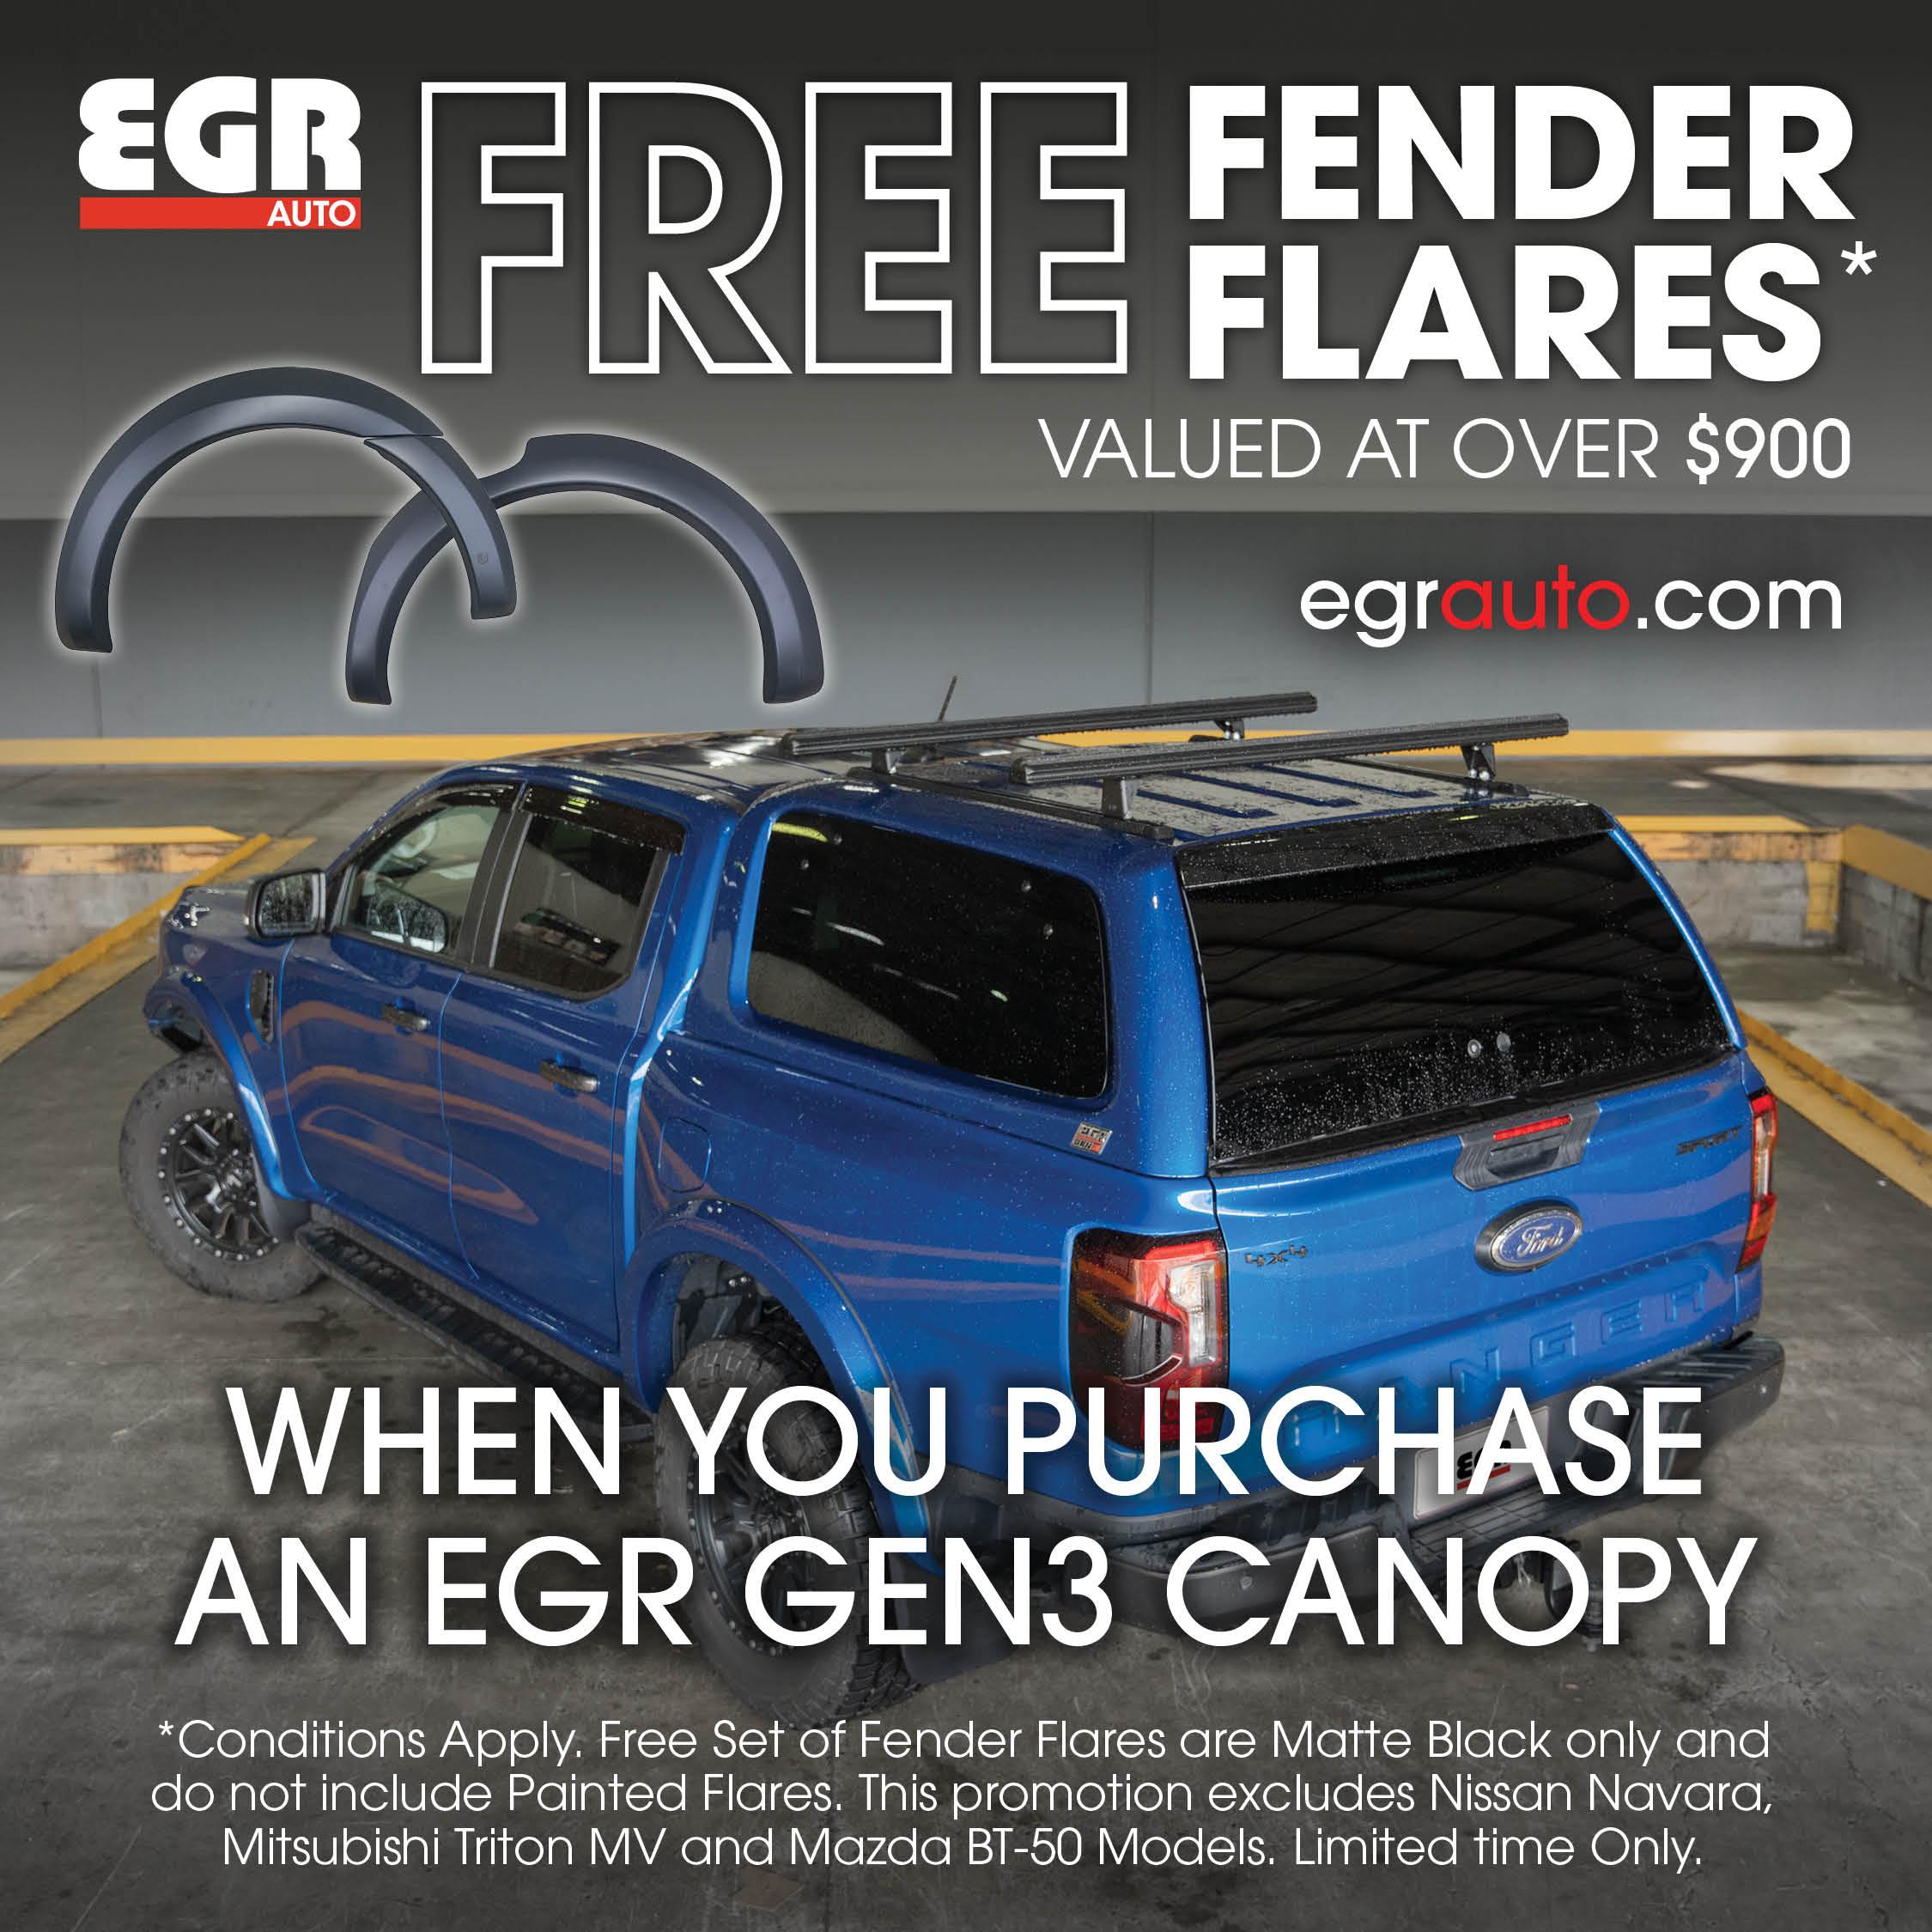 Promo banner - Click here for new EGR GEN3 Canopy and Fender Flare Bundle.